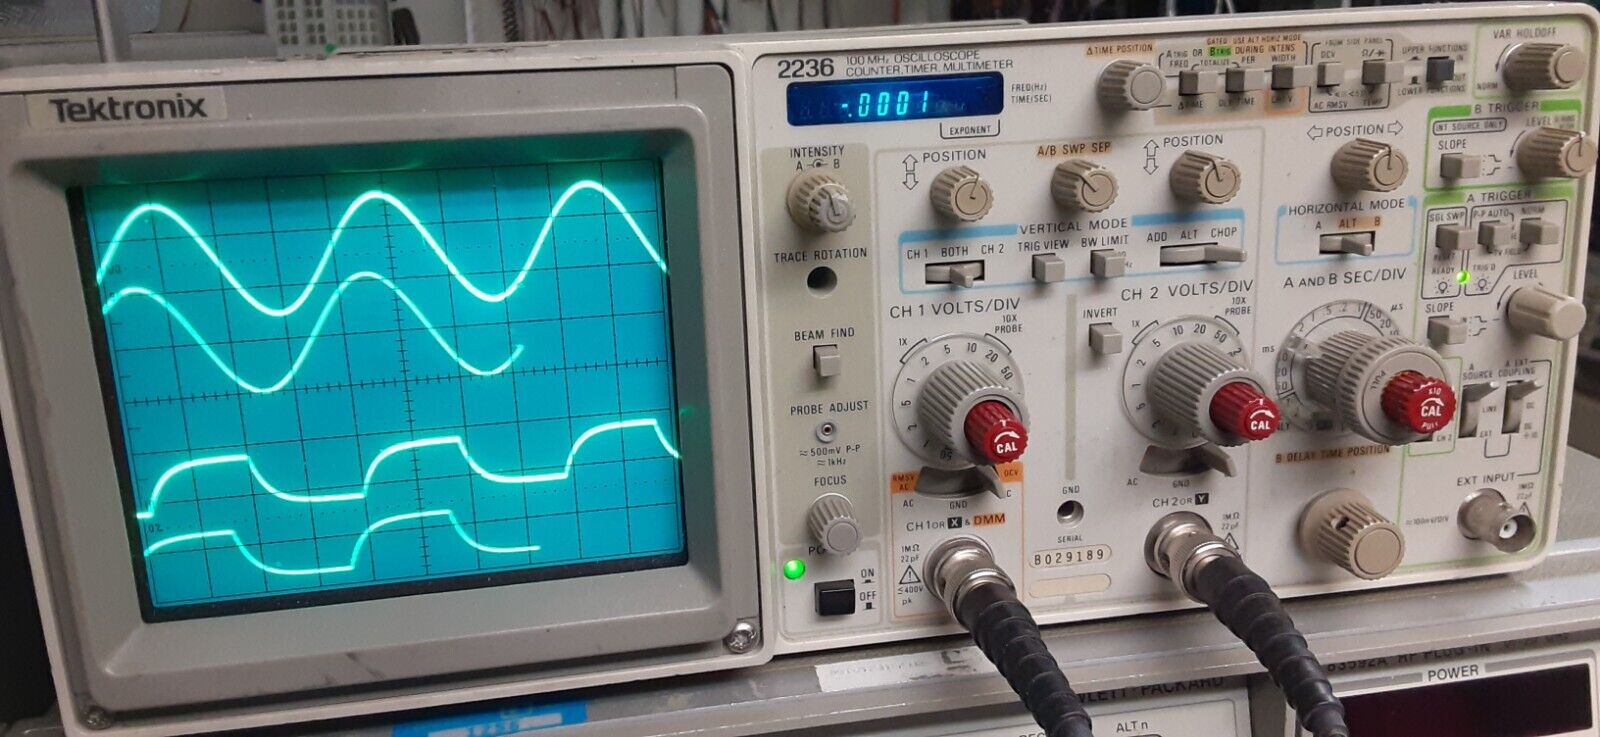 Tektronix 2236 Oscilloscope DMM 100MHz Frequency Counter BRIGHT CRT, ADJUSTED